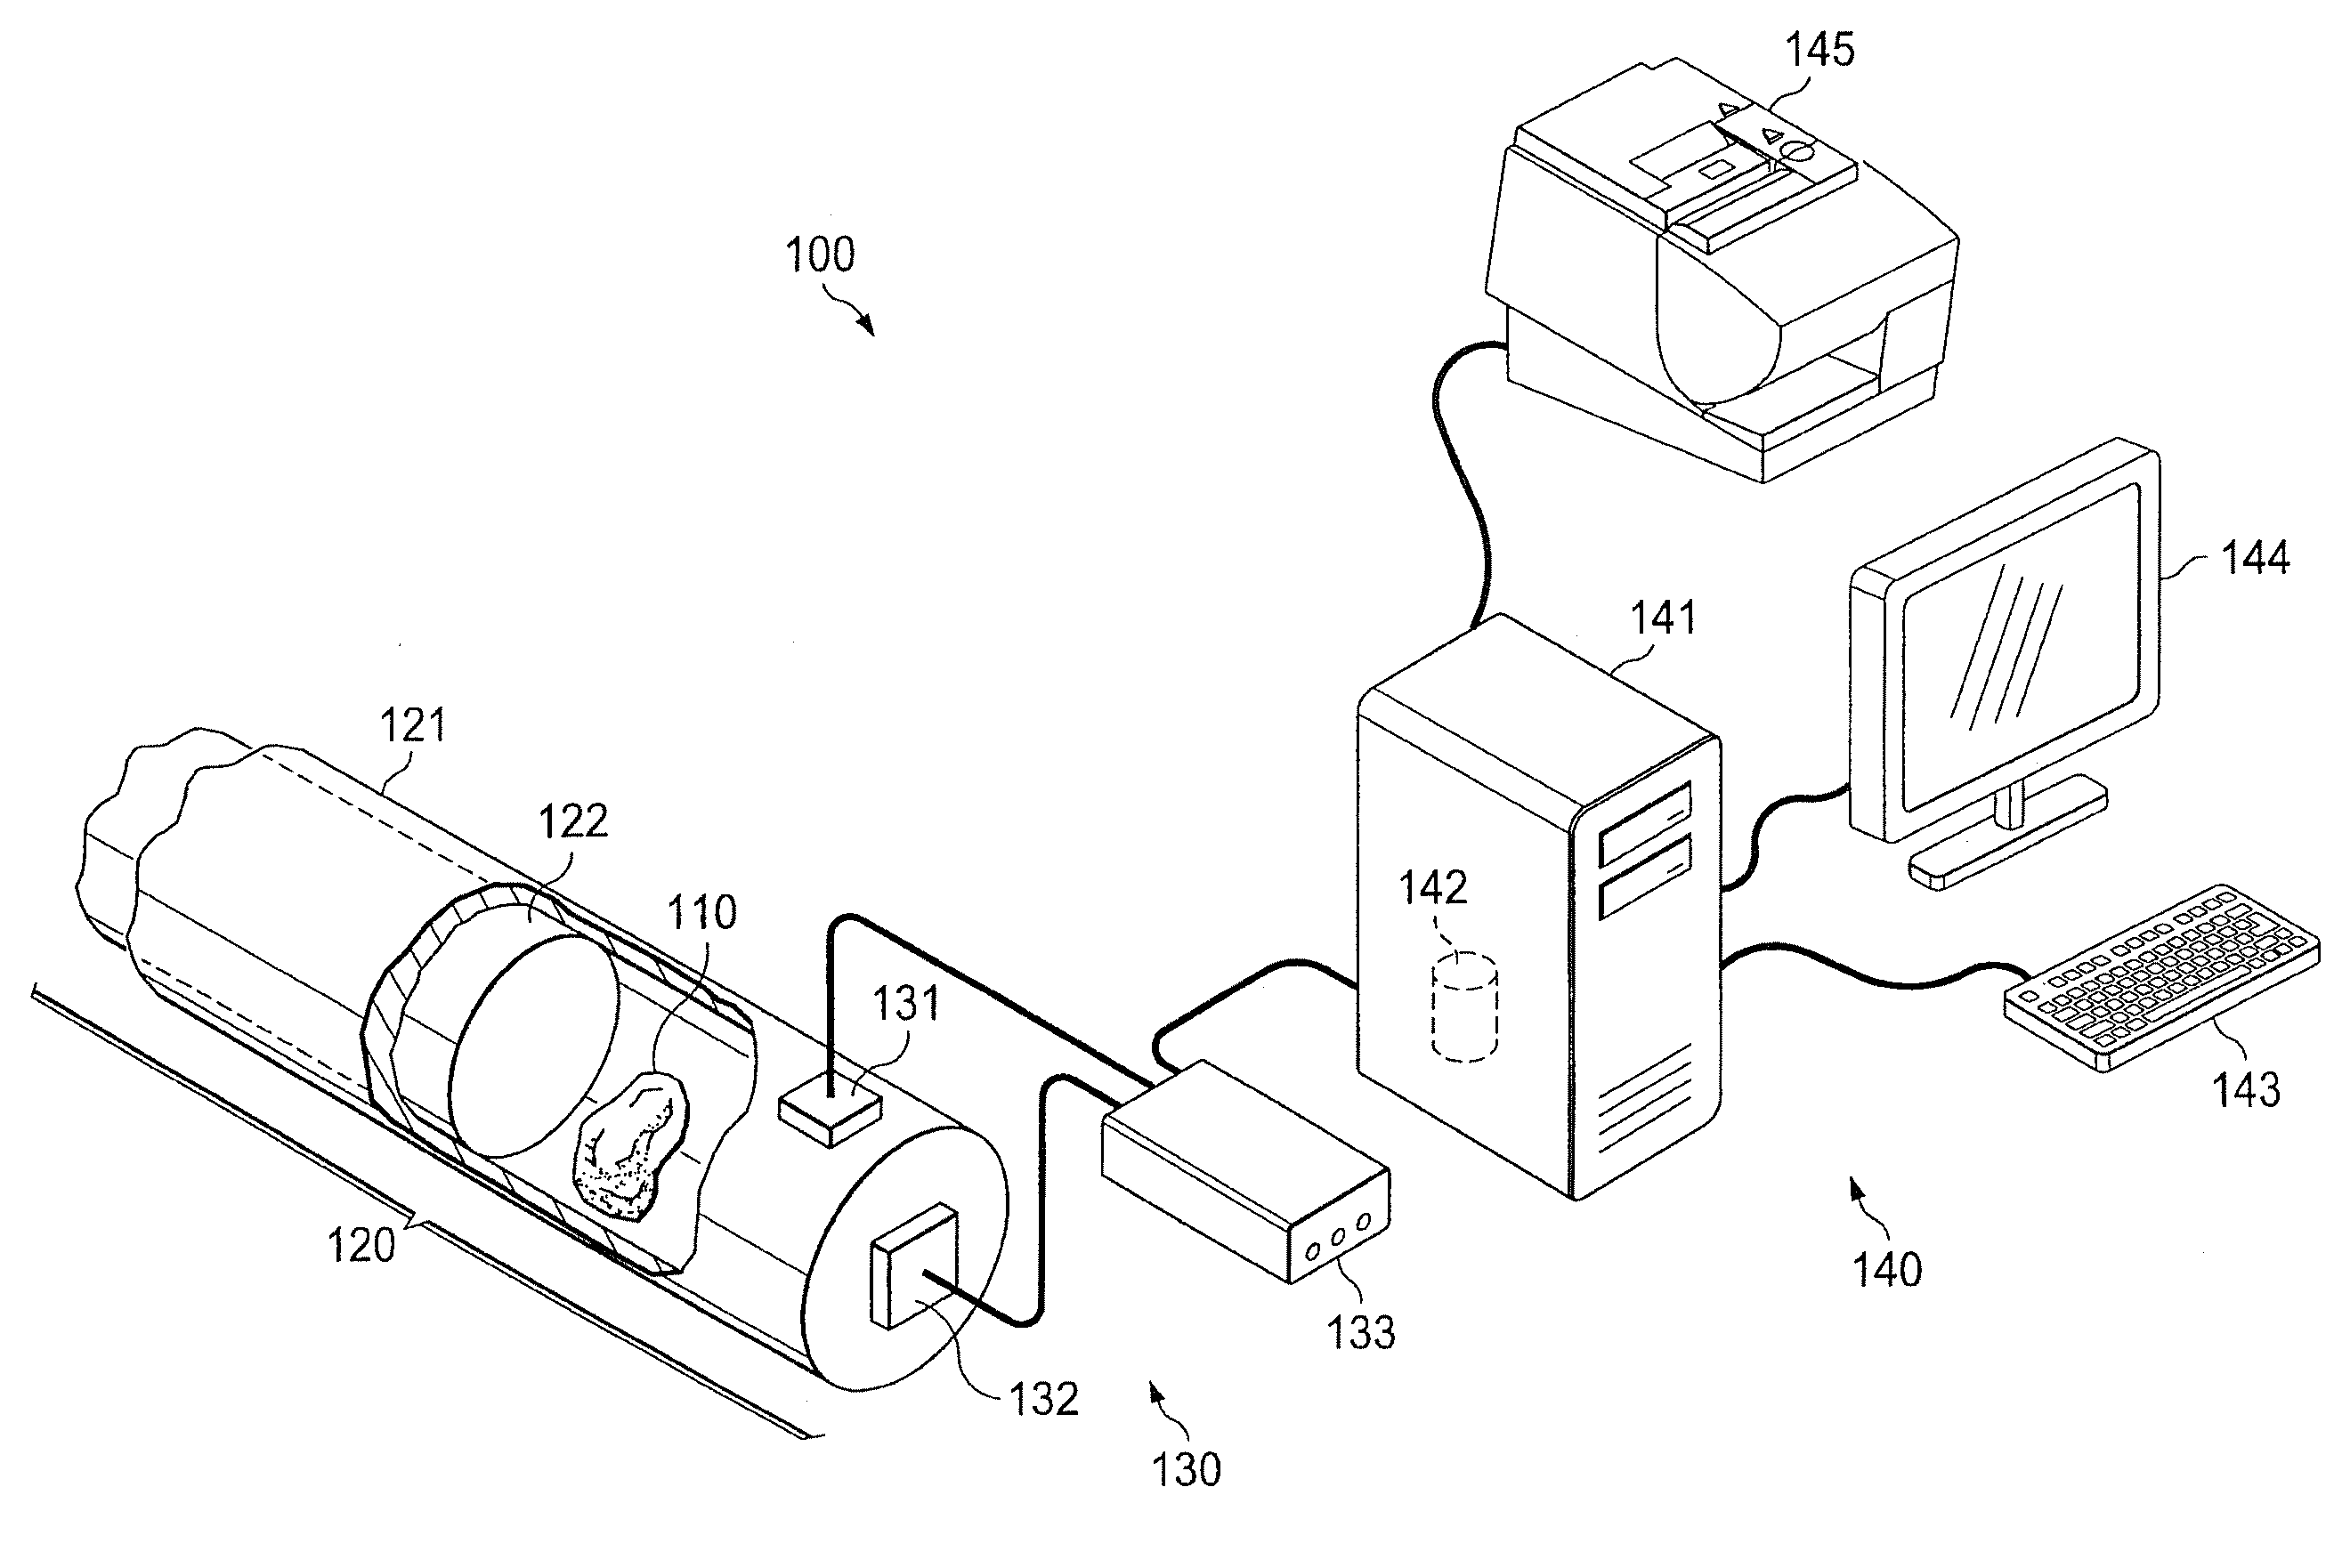 Systems and Methods For Determining Geologic Properties Using Acoustic Analysis